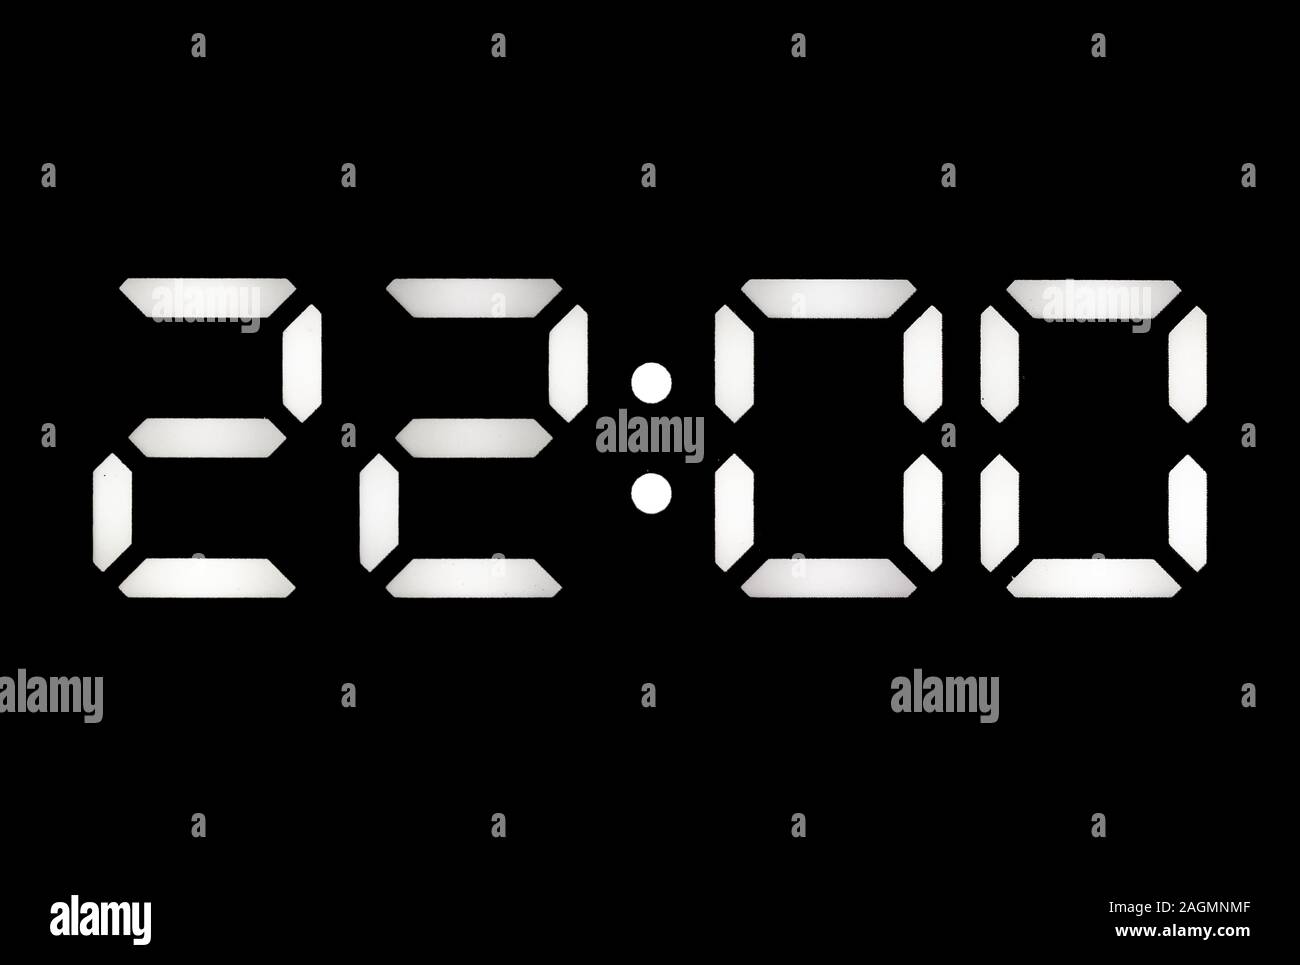 Real white led digital clock on a black background showing time 22:00 Stock Photo